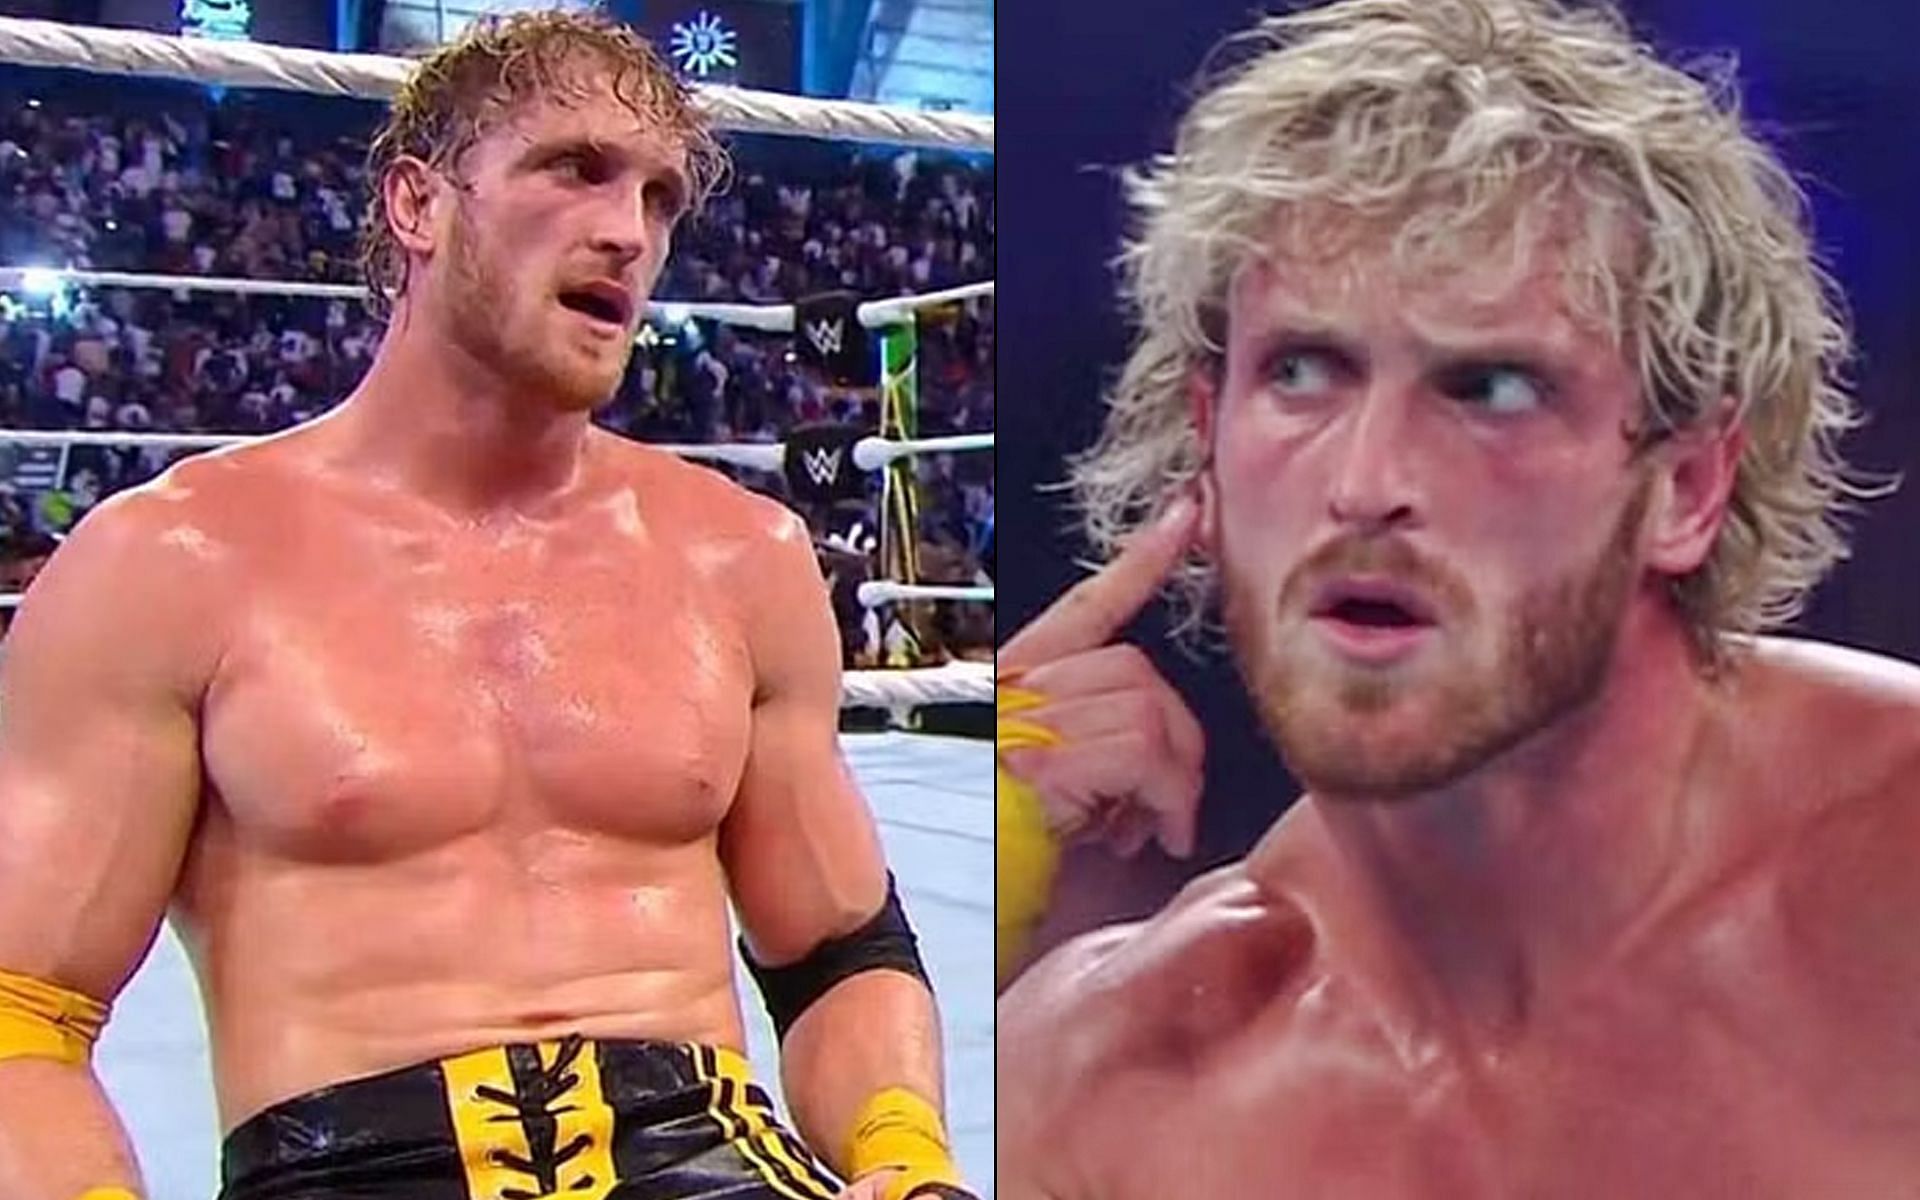 Logan Paul is your current United States Champion in the company.